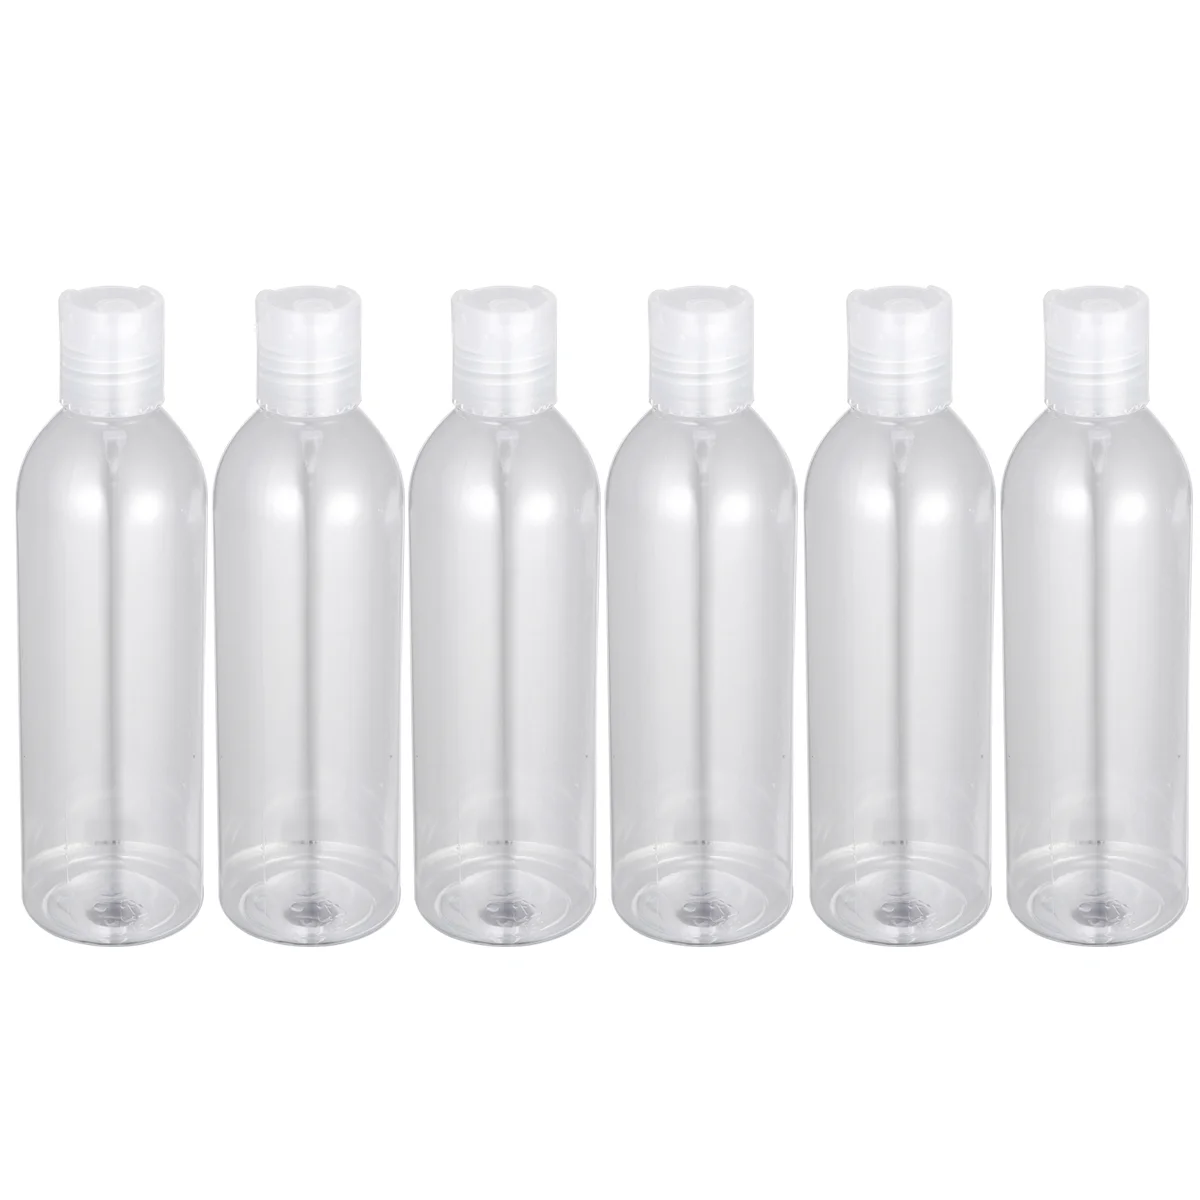 5colors Liquid Sample Container with Press Type Lid Travel Lotion Travel Toiletries Storage Vial PET Empty Bottle